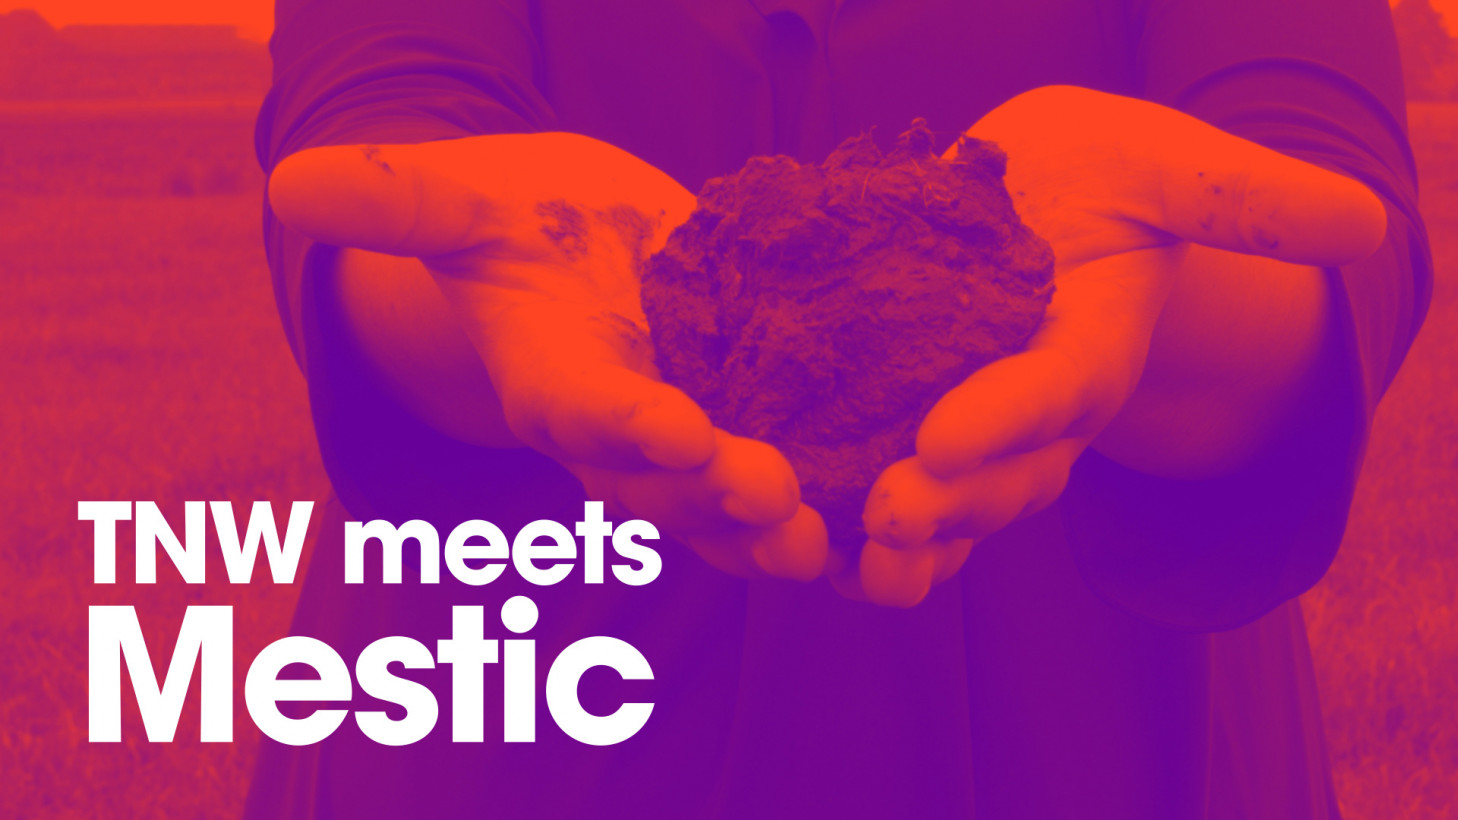 Video Meet Mestic The Company That Makes Fabric Out Of Cow Poop